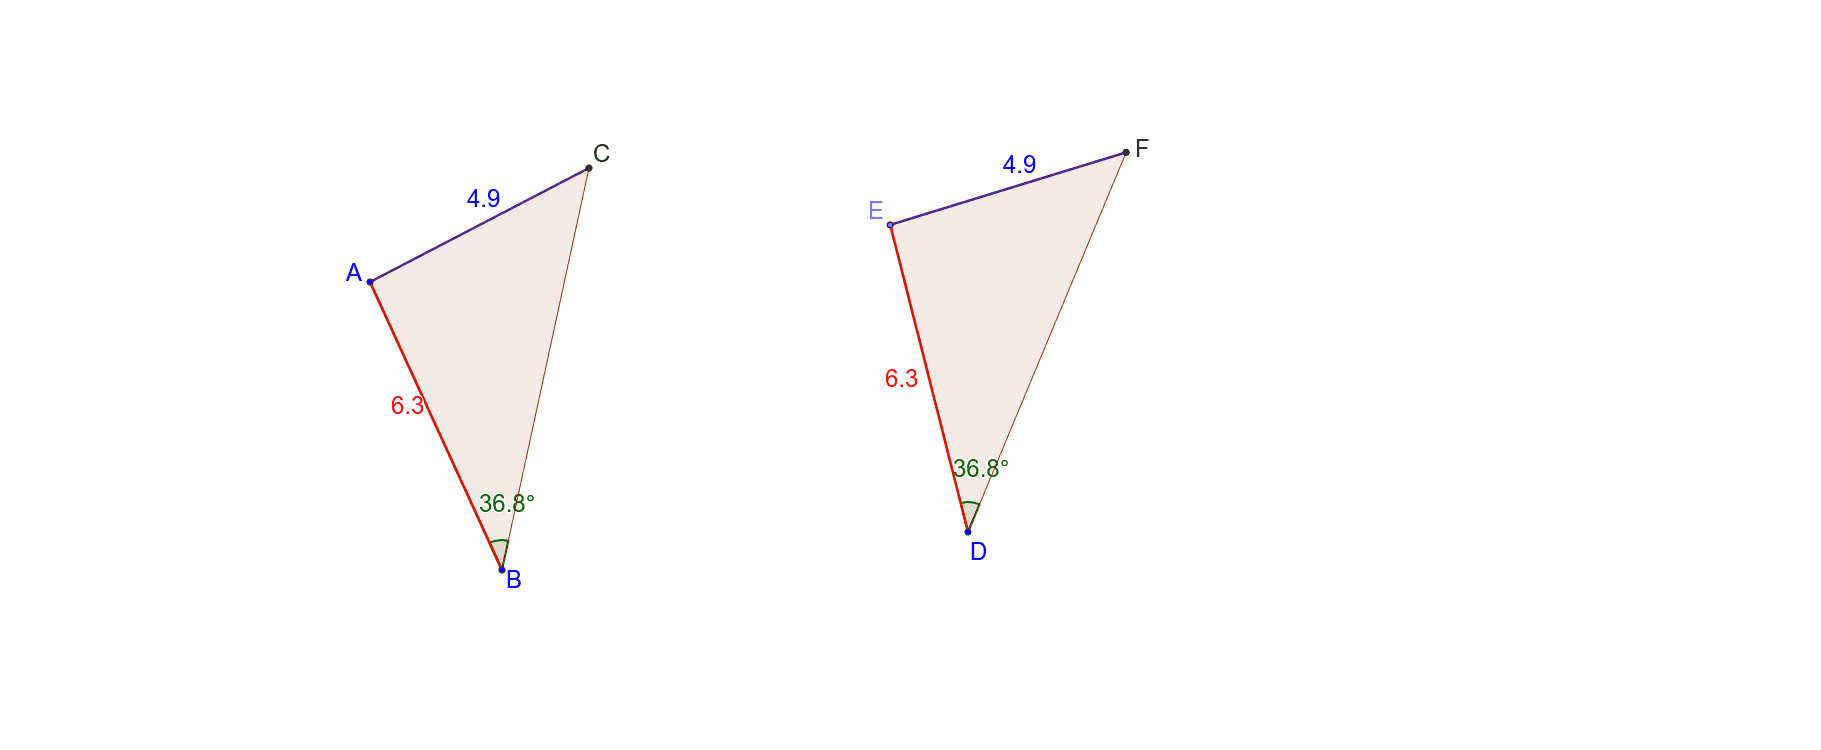 Drag any point on triangle ABC to resize the triangle. Study what happens to triangle EDF when you resize triangle ABC. Also try to coincide (put one triangle on top of the other) and see if they match up. Press Enter to start activity